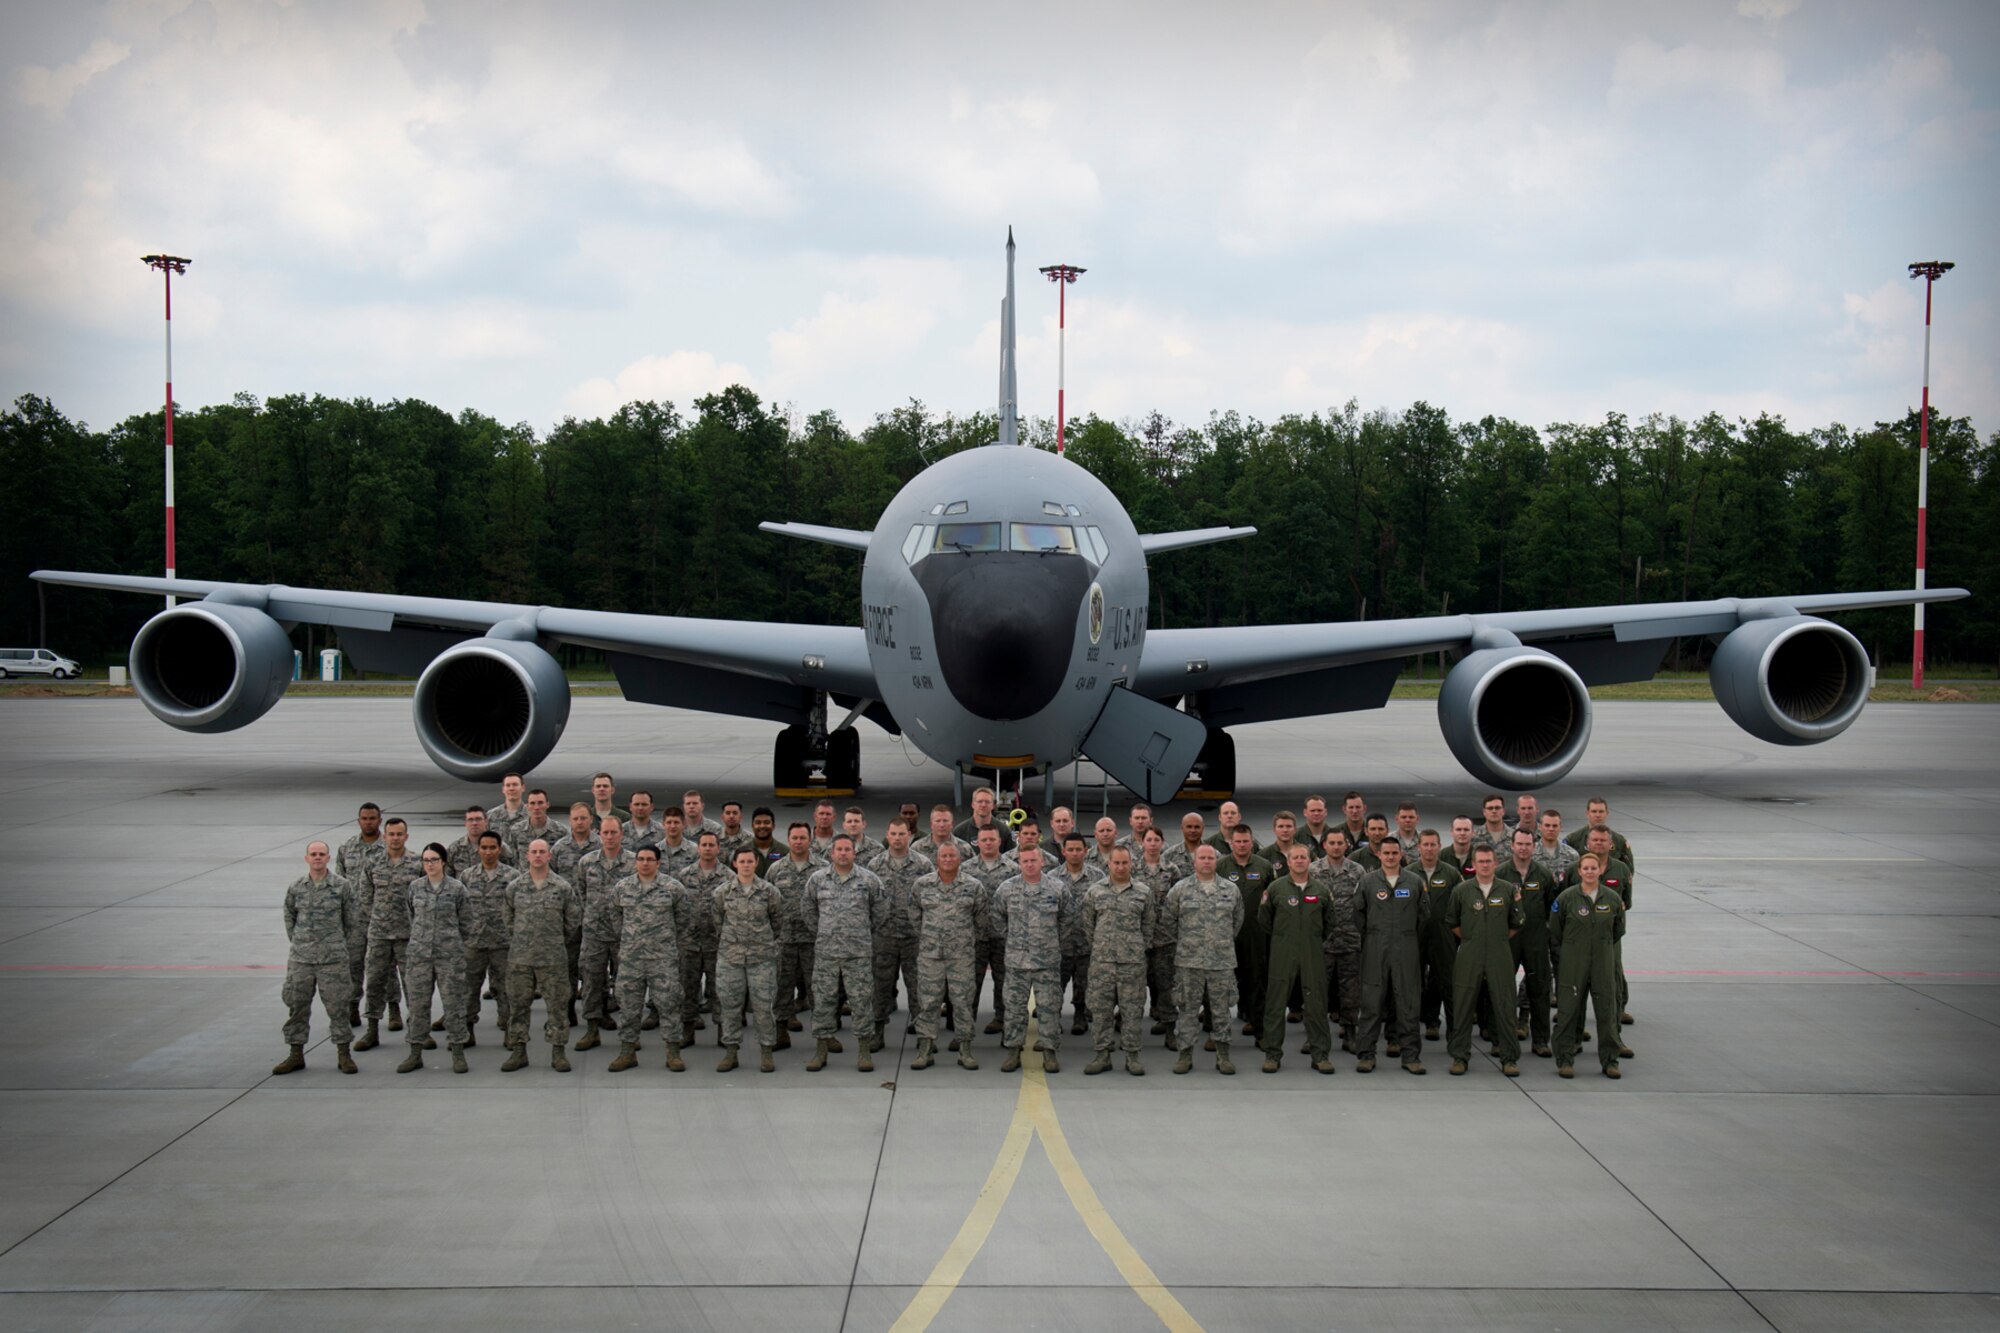 Aircrew, boom operators, maintenance and support Airmen from the 100th and 434th Air Refueling wings at Royal Air Force Mildenhall, England, and Grissom Air Reserve Base, Ind., stand in formation in front of a KC-135 Stratotanker from the 434th ARW before wrapping up Baltic Operations 2016, June 15, 2016, at Powidz Air Base, Poland. The KC-135s flew 30 sorties; 95 flying hours off-loading 953 pounds of JP8 fuel to U.S. jets and Polish F-16s, totaling 93 receivers, 27 of which were Polish. (U.S. Air Force photo/Senior Airman Erin Babis)